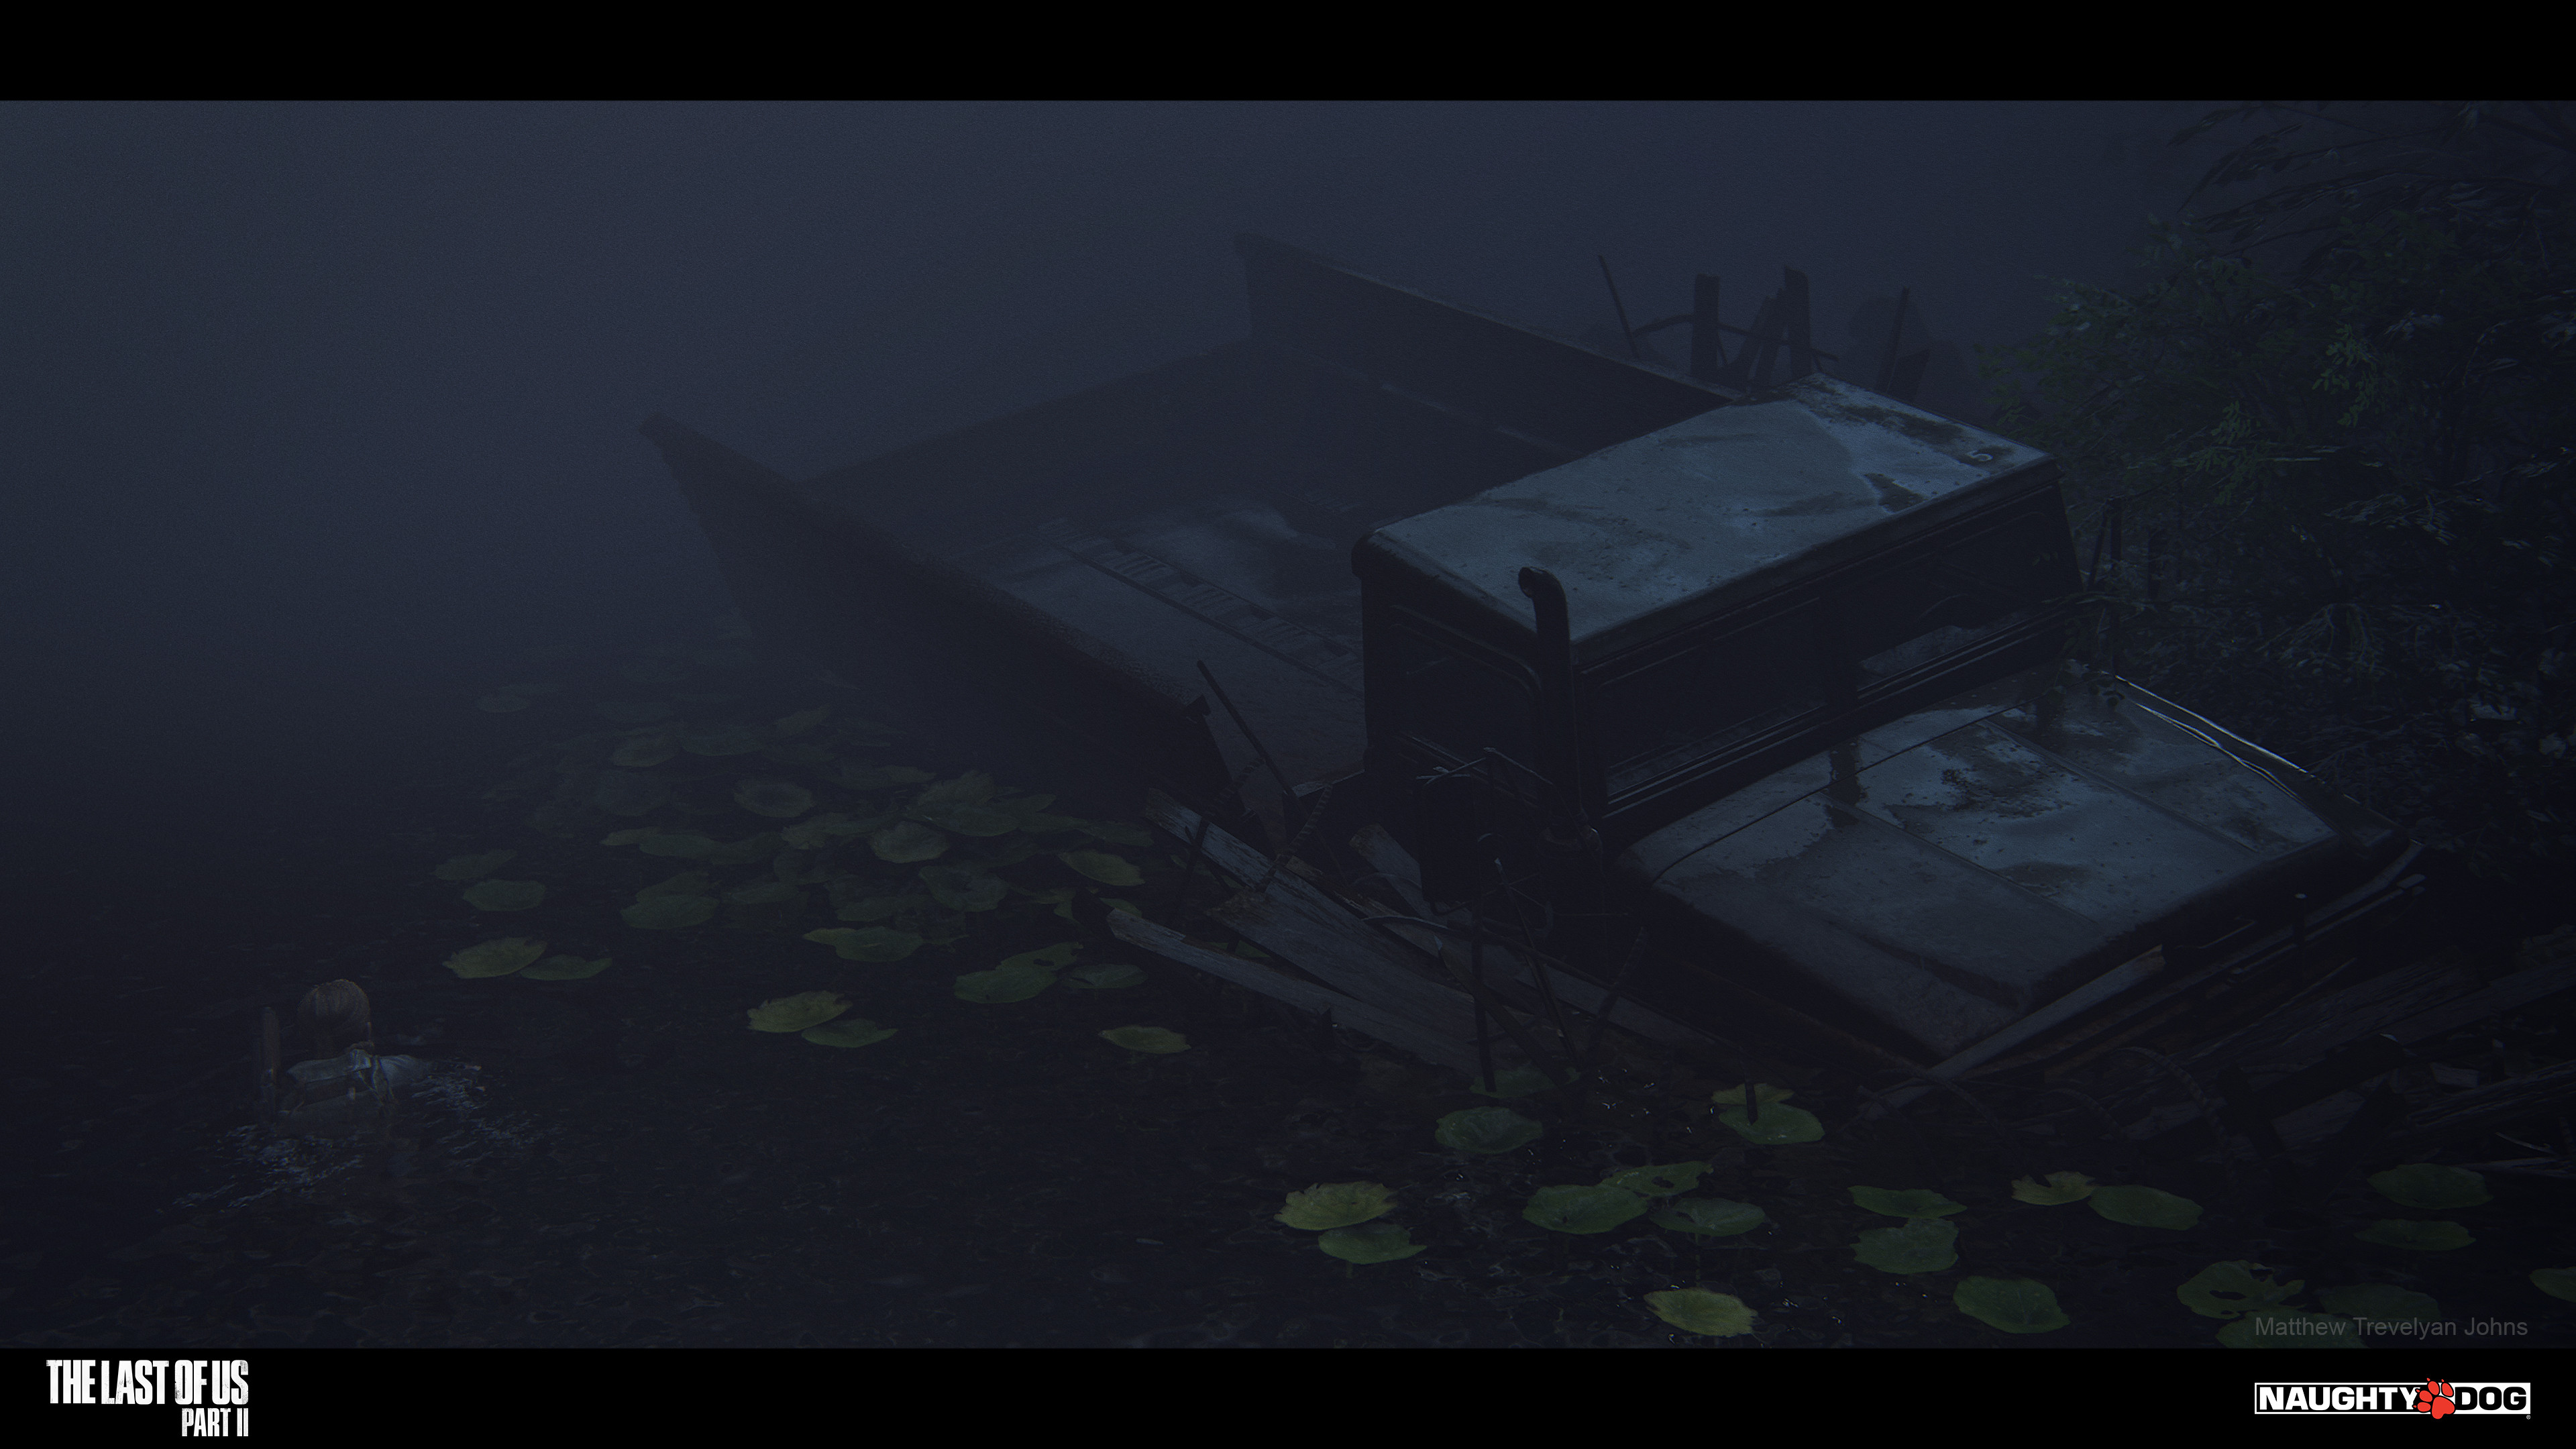 As well as the water-line shader effects, additional set dressing like these lily pads and debris assets I placed in one of my levels would also help sell the look of a vehicle long since abandoned in deep water